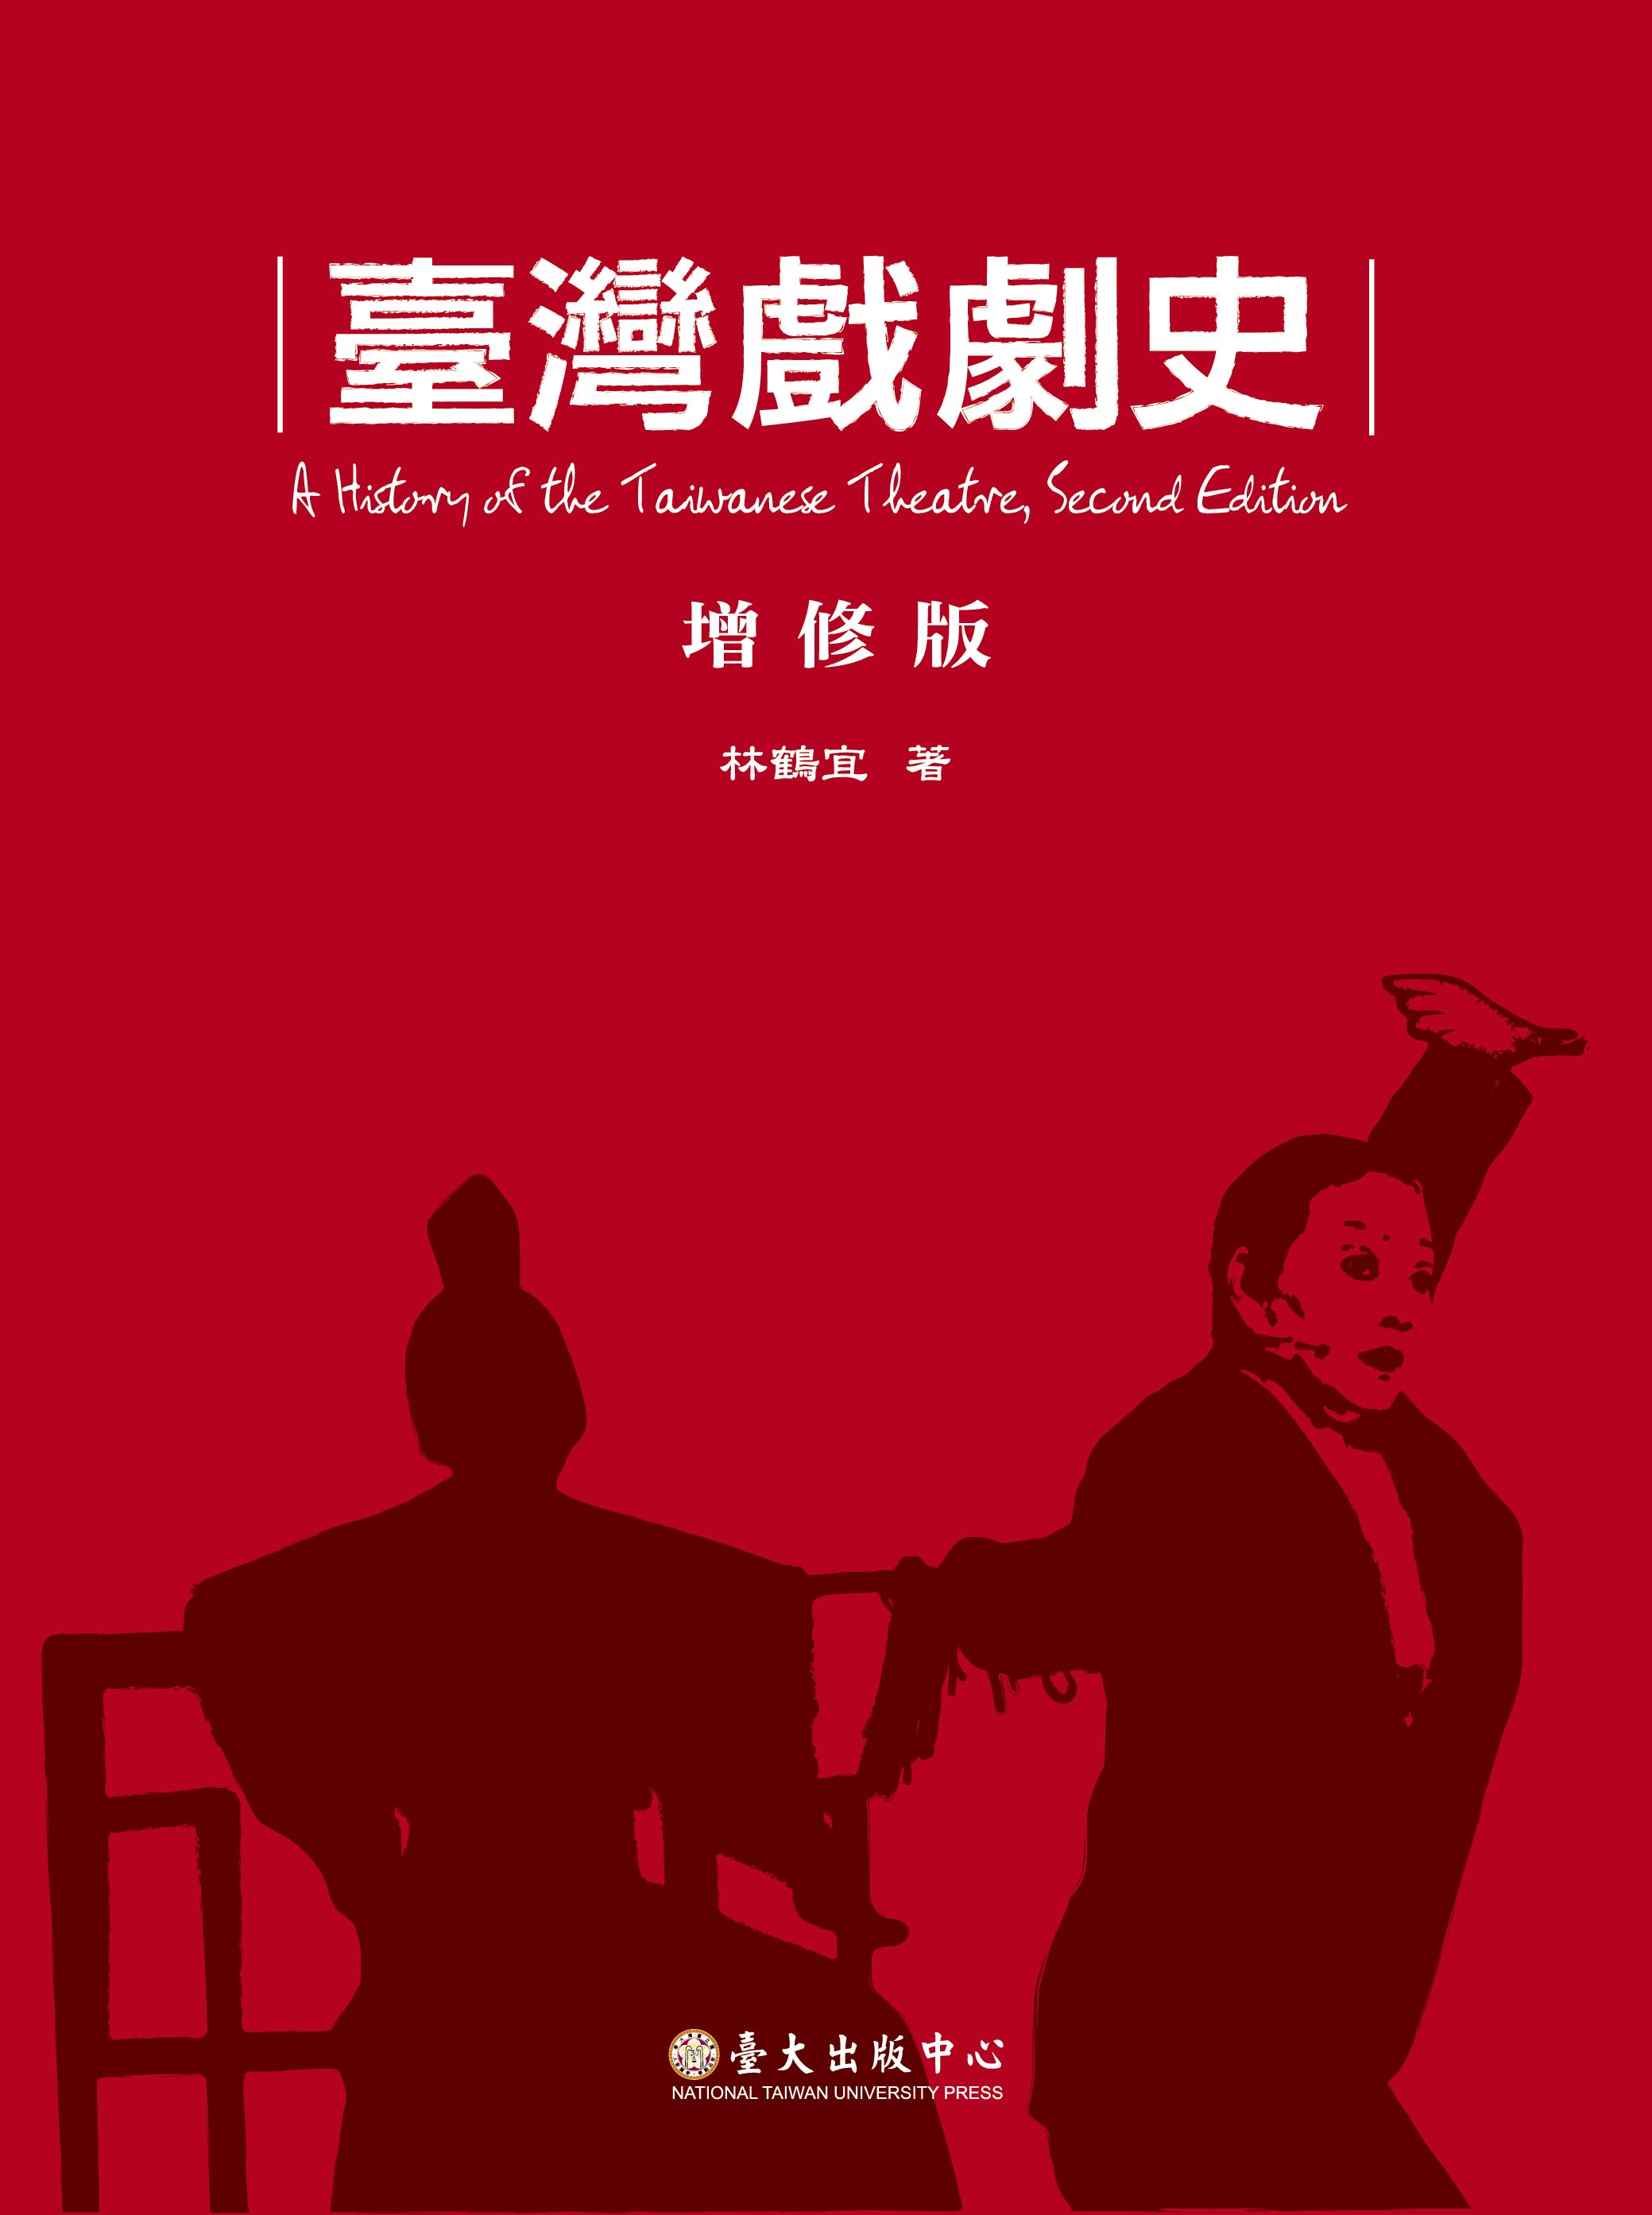 A History of the Taiwanese Theatre, Second Edition